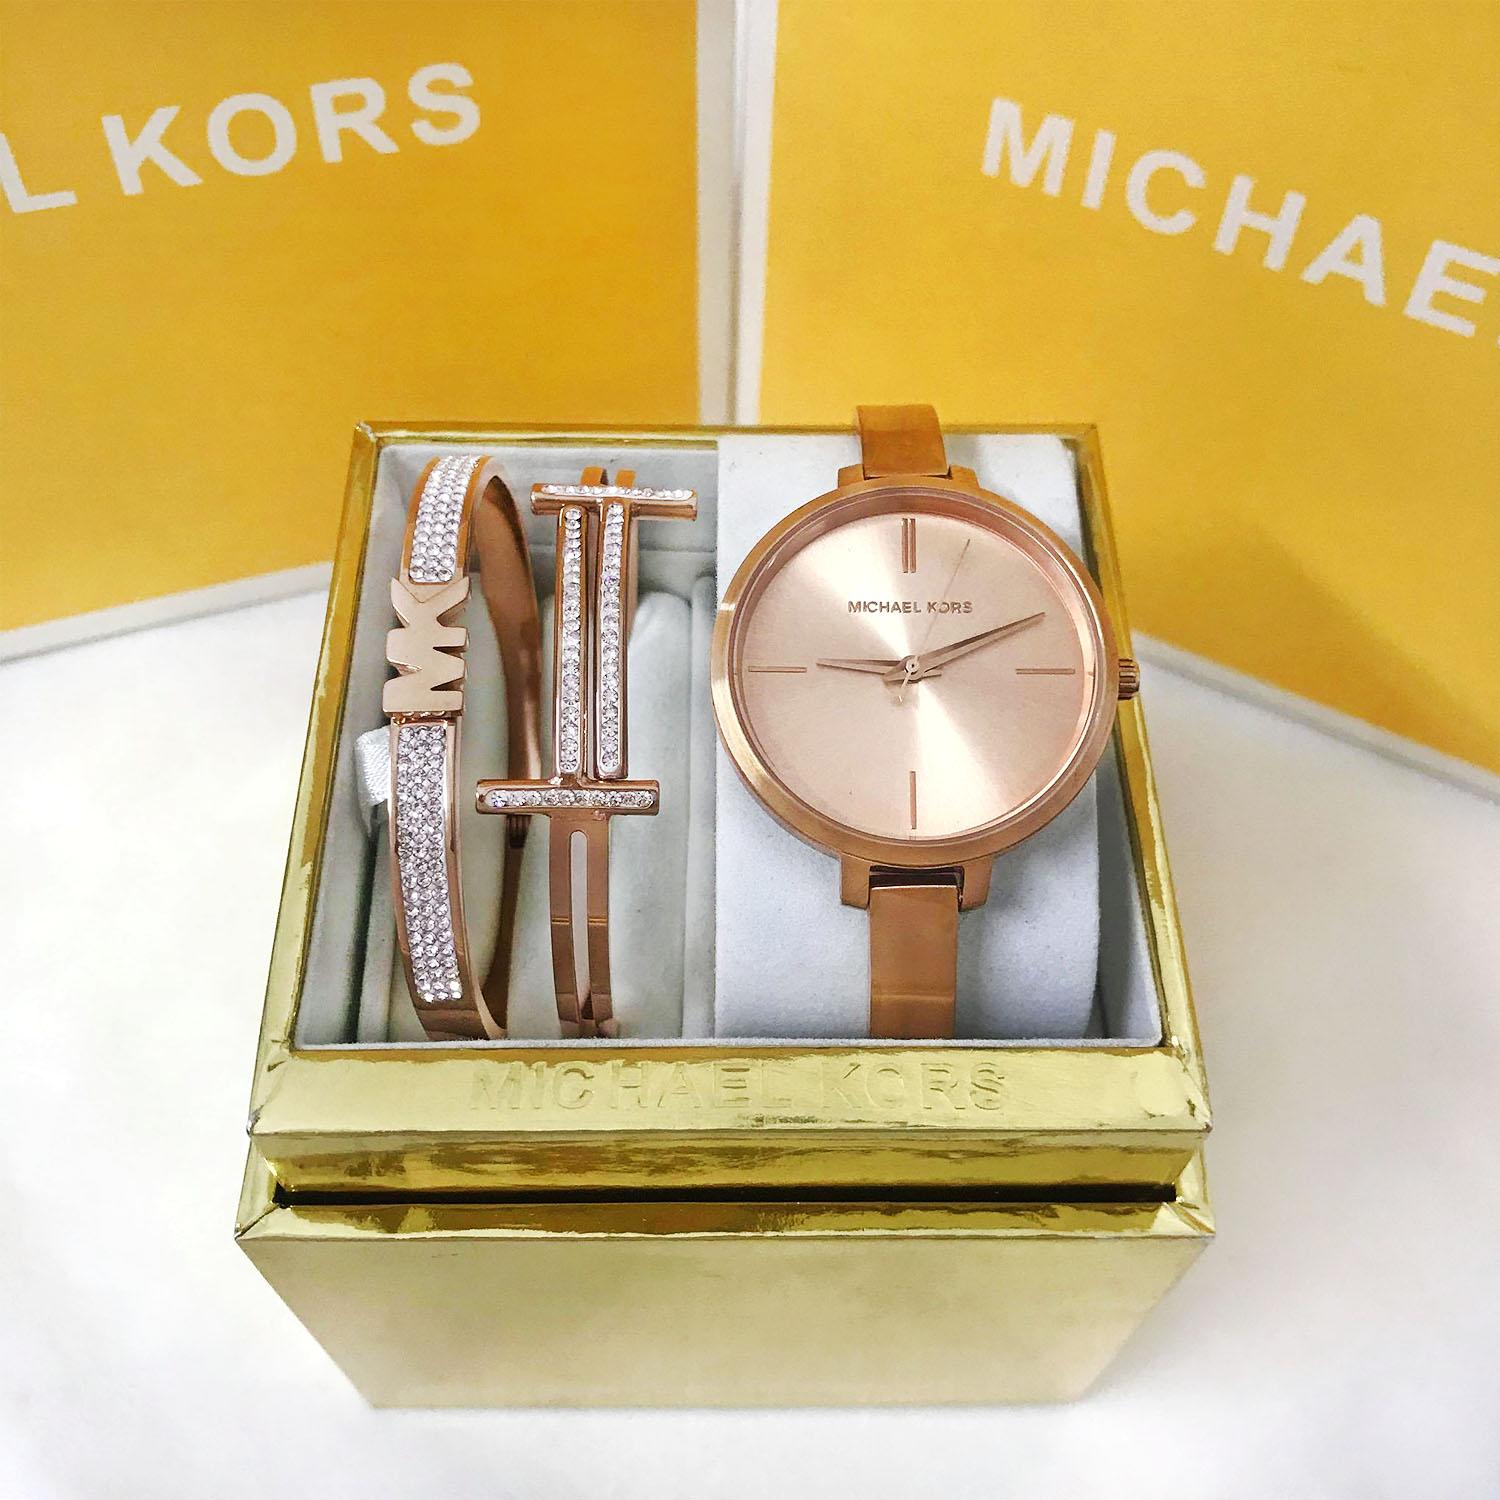 MICHAEL KORS NEW ZEALAND  MK4642 Michael Kors Emery ThreeHand Stainless  Steel Watch RRP 44900  Michael Kors Watches NZ Sale  Michael Kors Smart  Watches NZ Mk Watches Afterpay